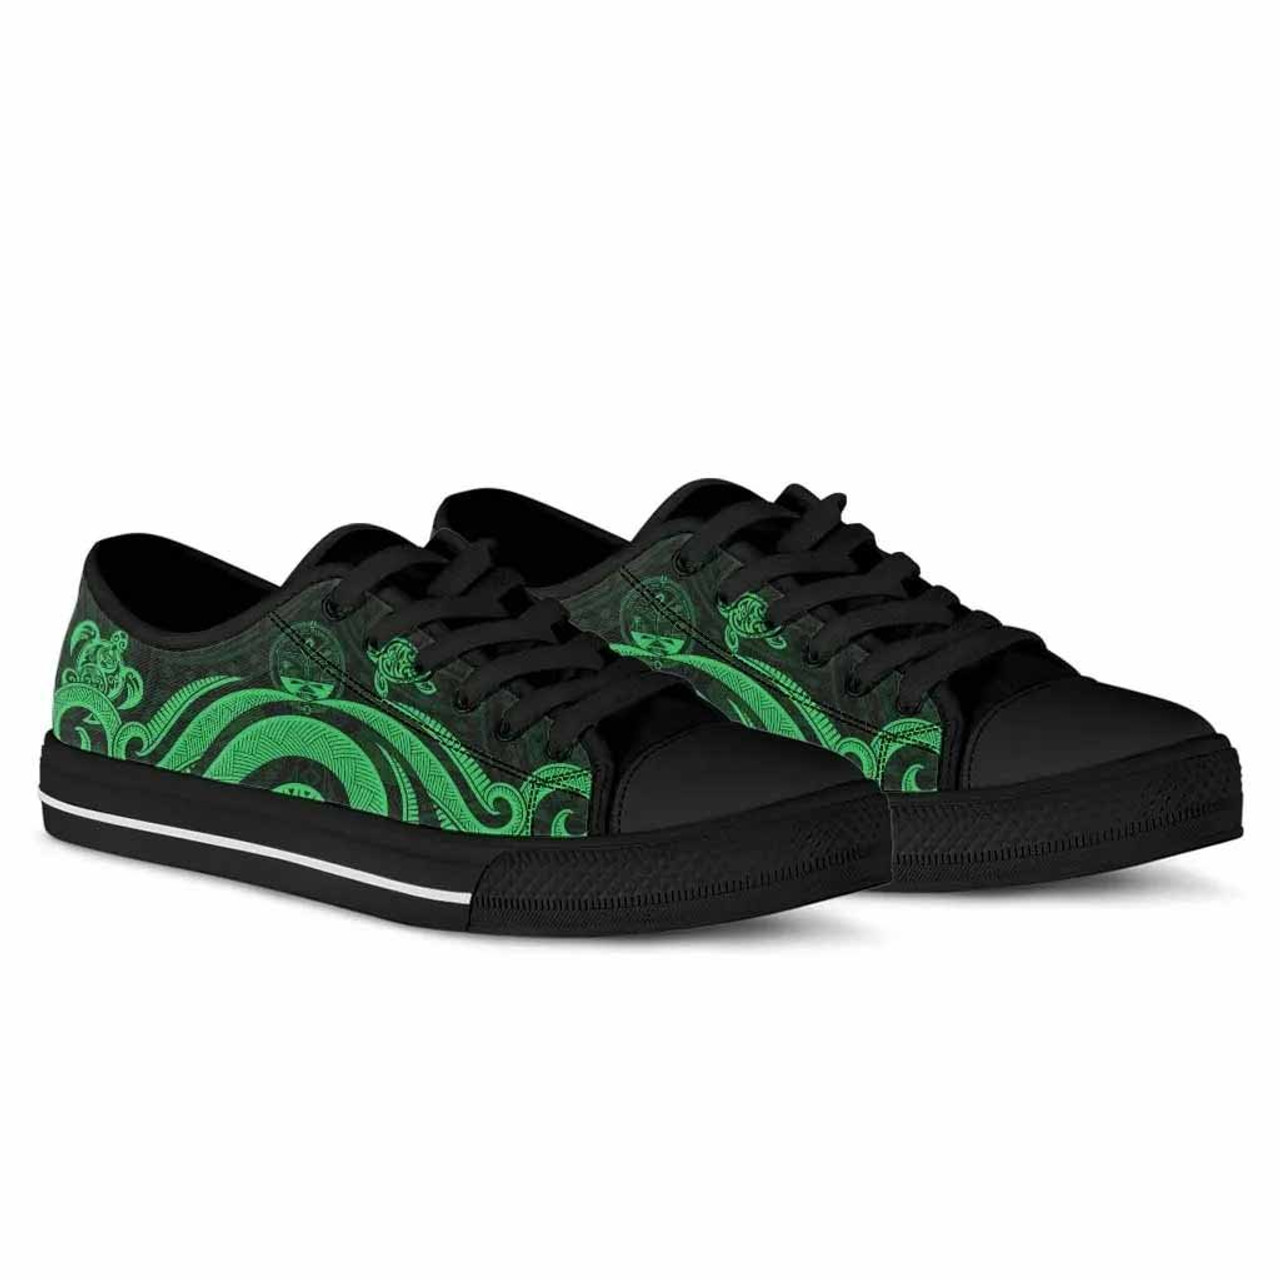 Marshall Islands Low Top Canvas Shoes - Green Tentacle Turtle Crest 2